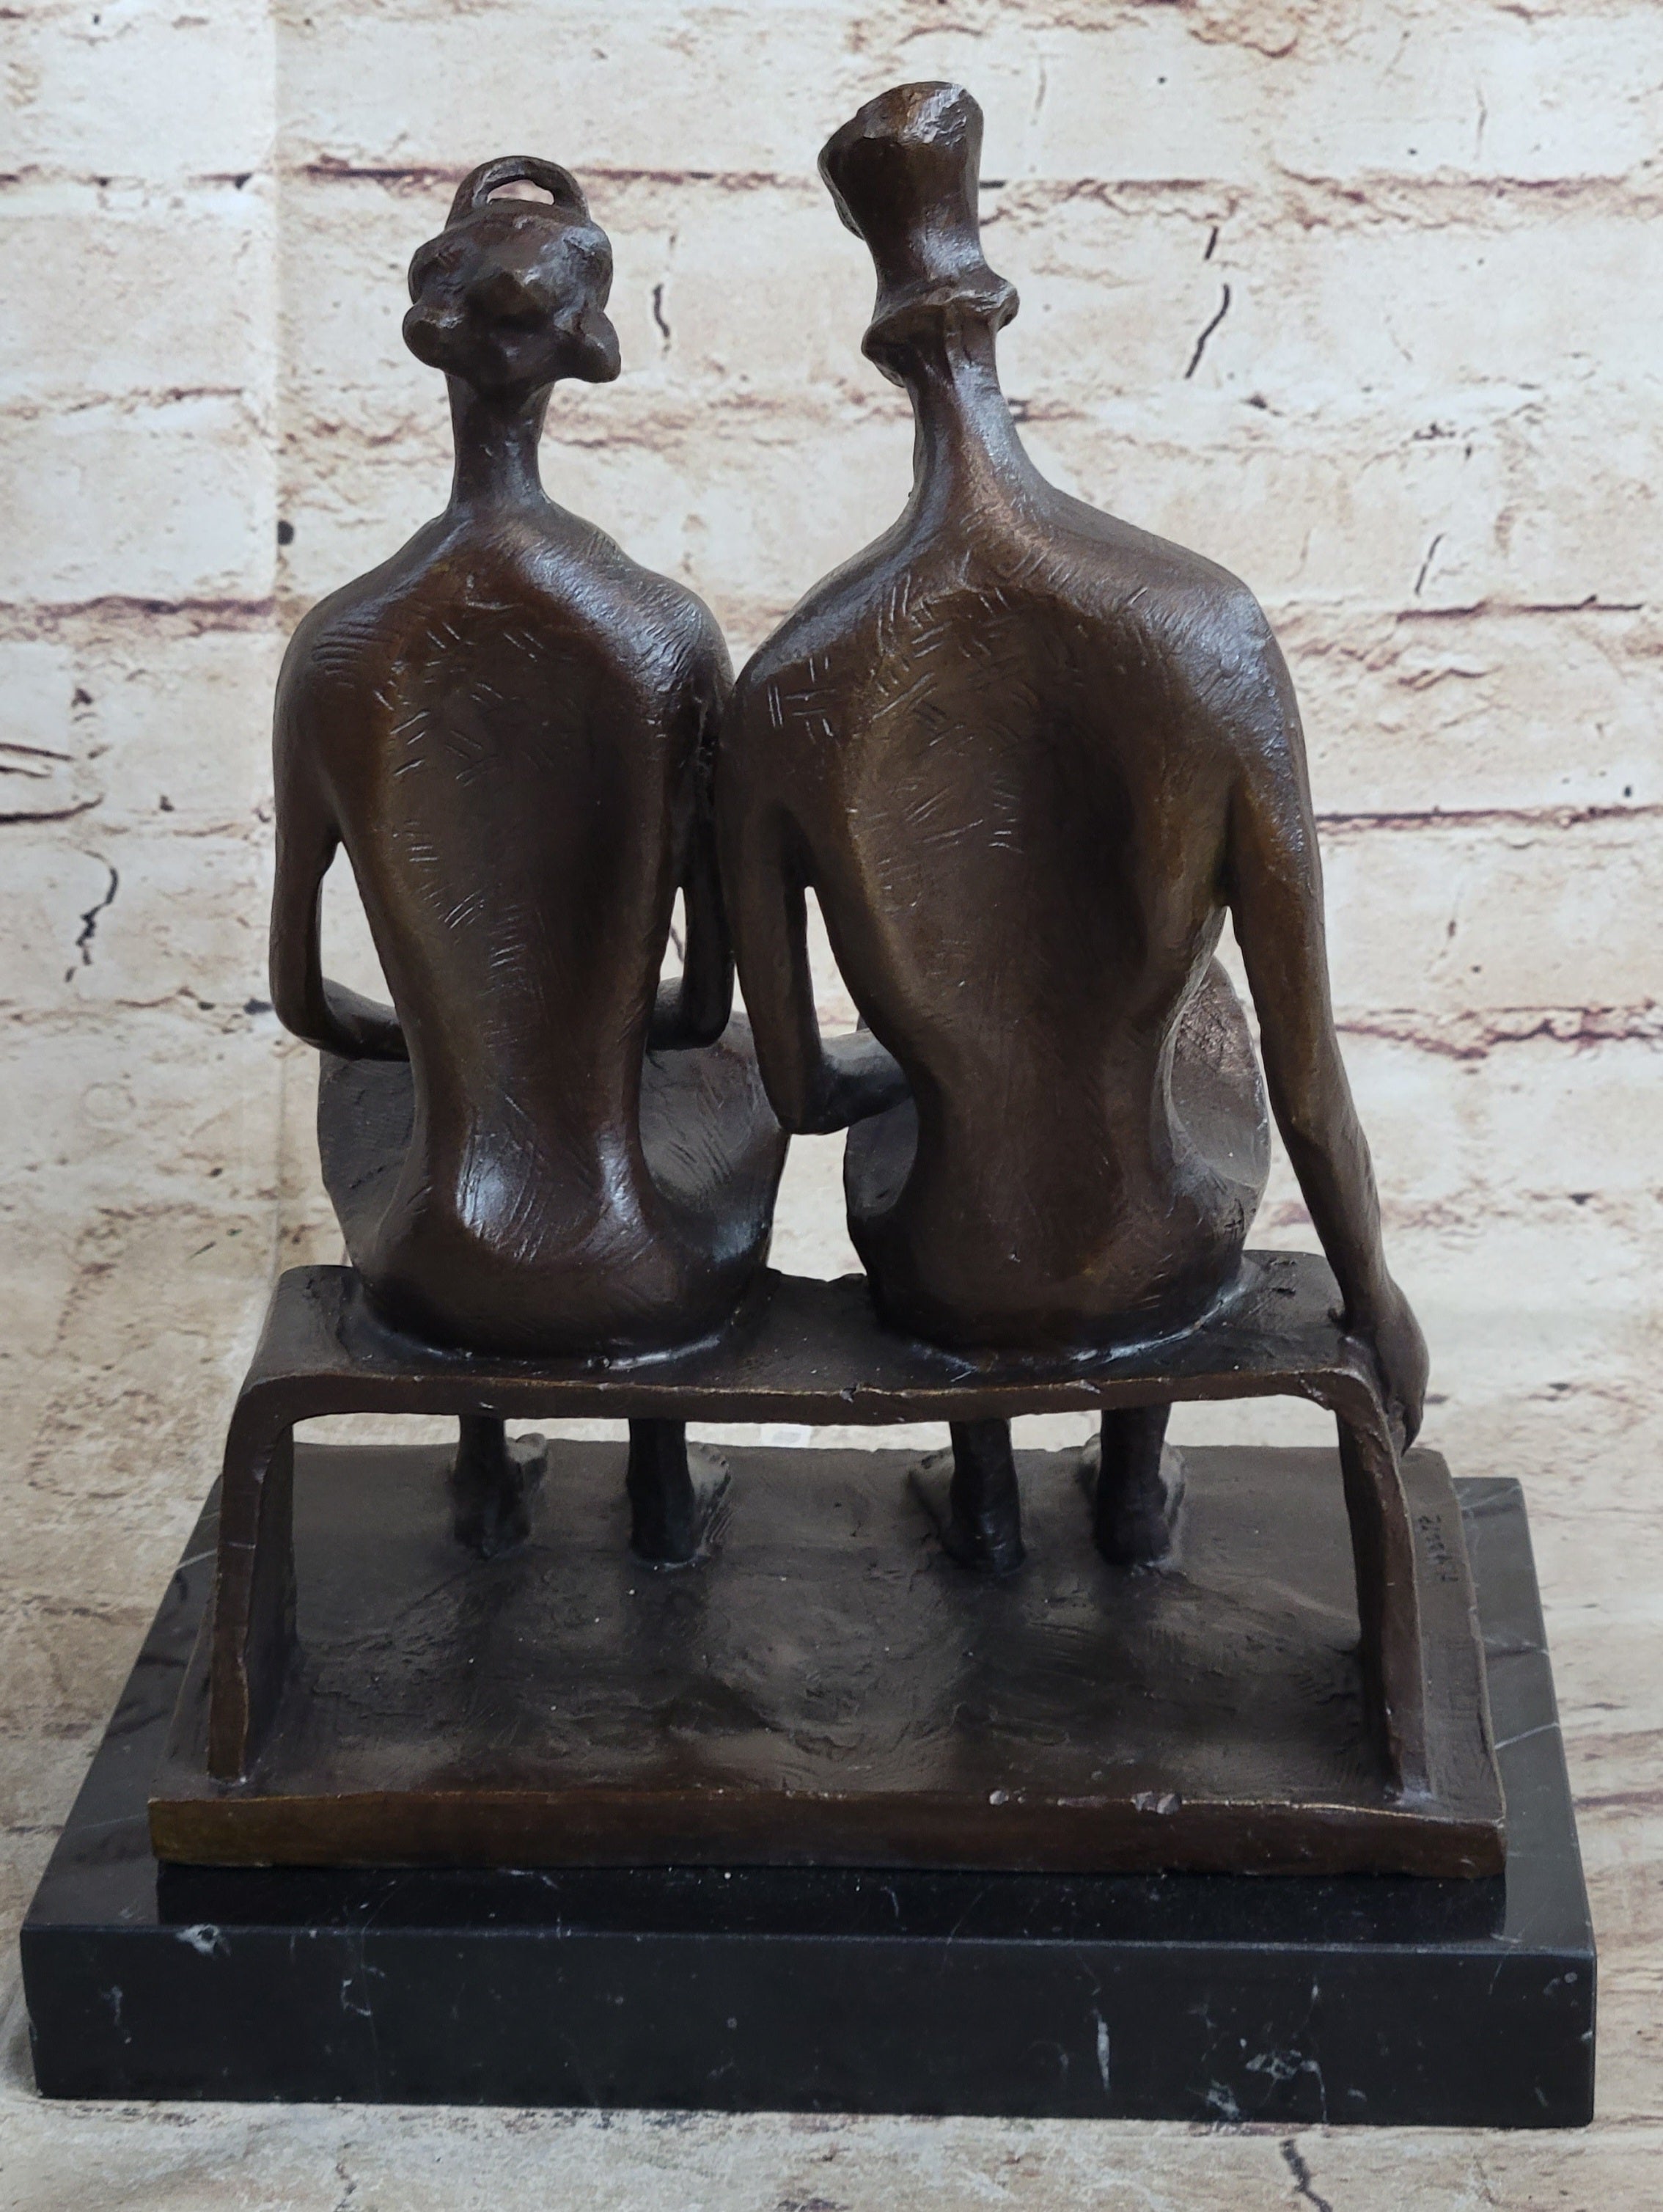 King and Queen (sculpture) - Wikipedia